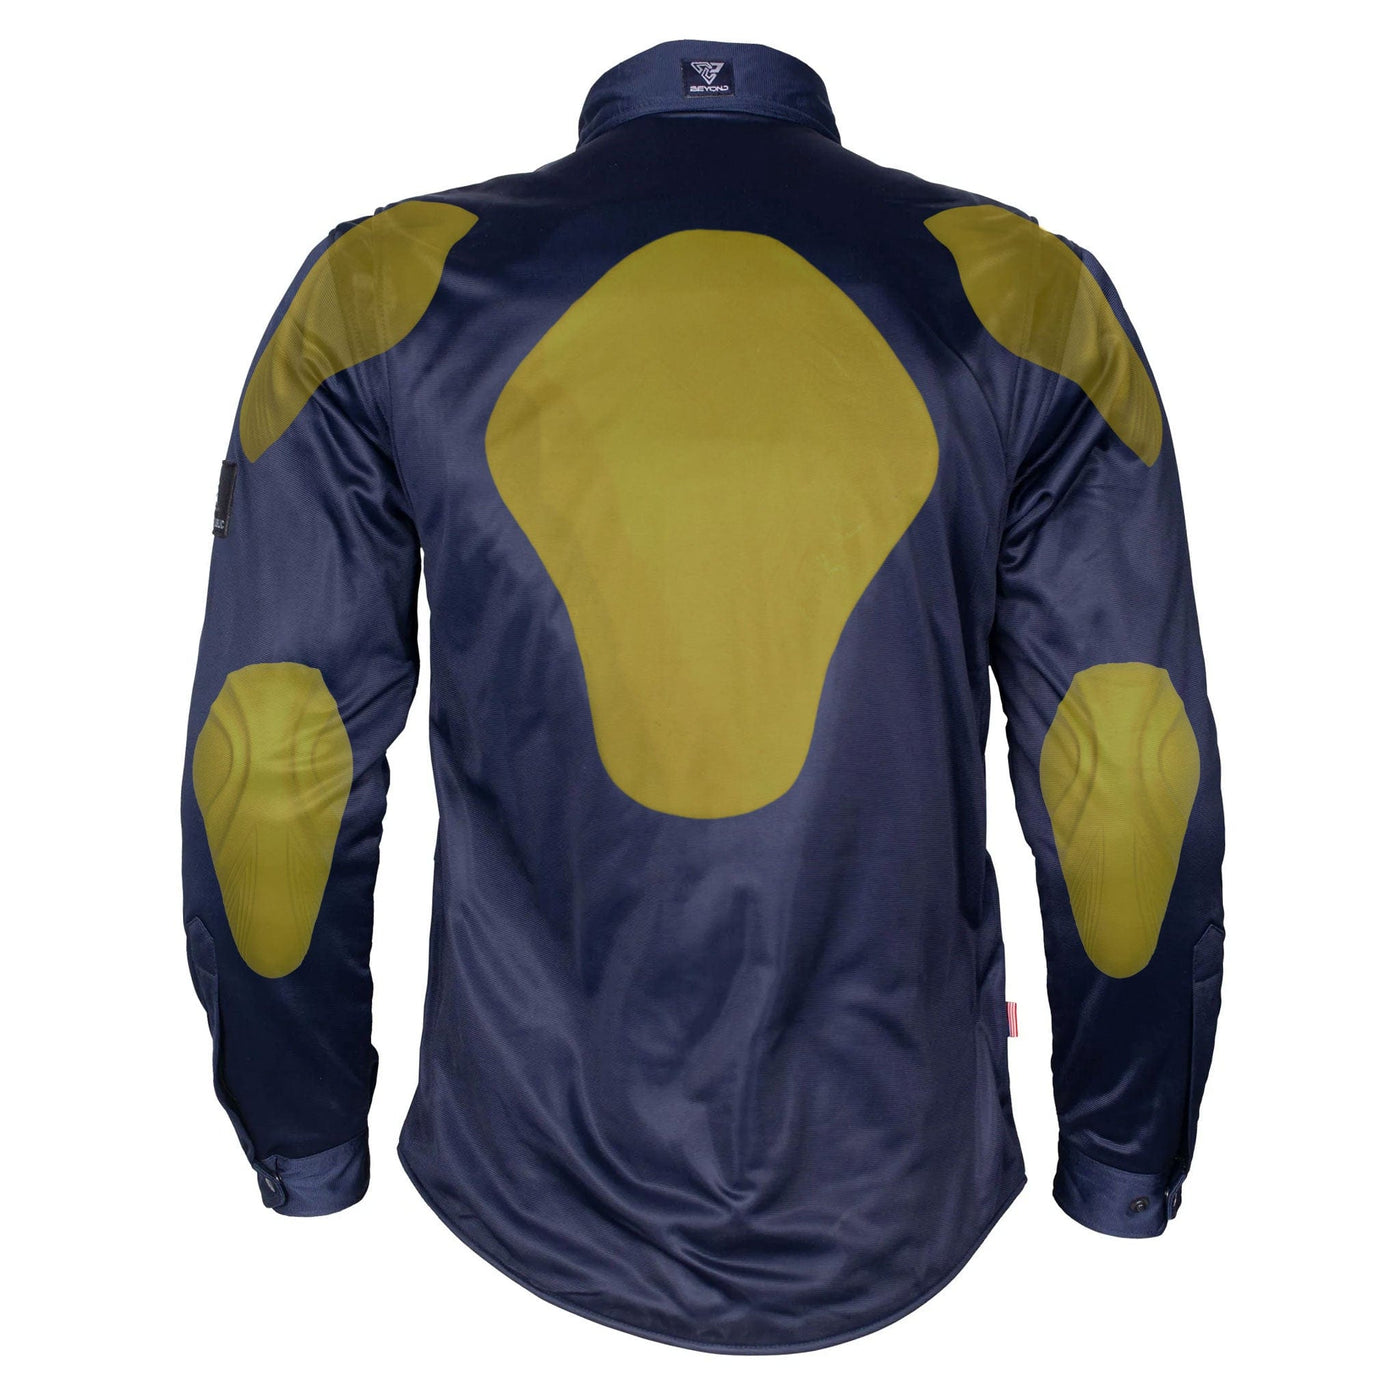 Ultra Protective Shirt with Pads - Dark Navy Blue Solid